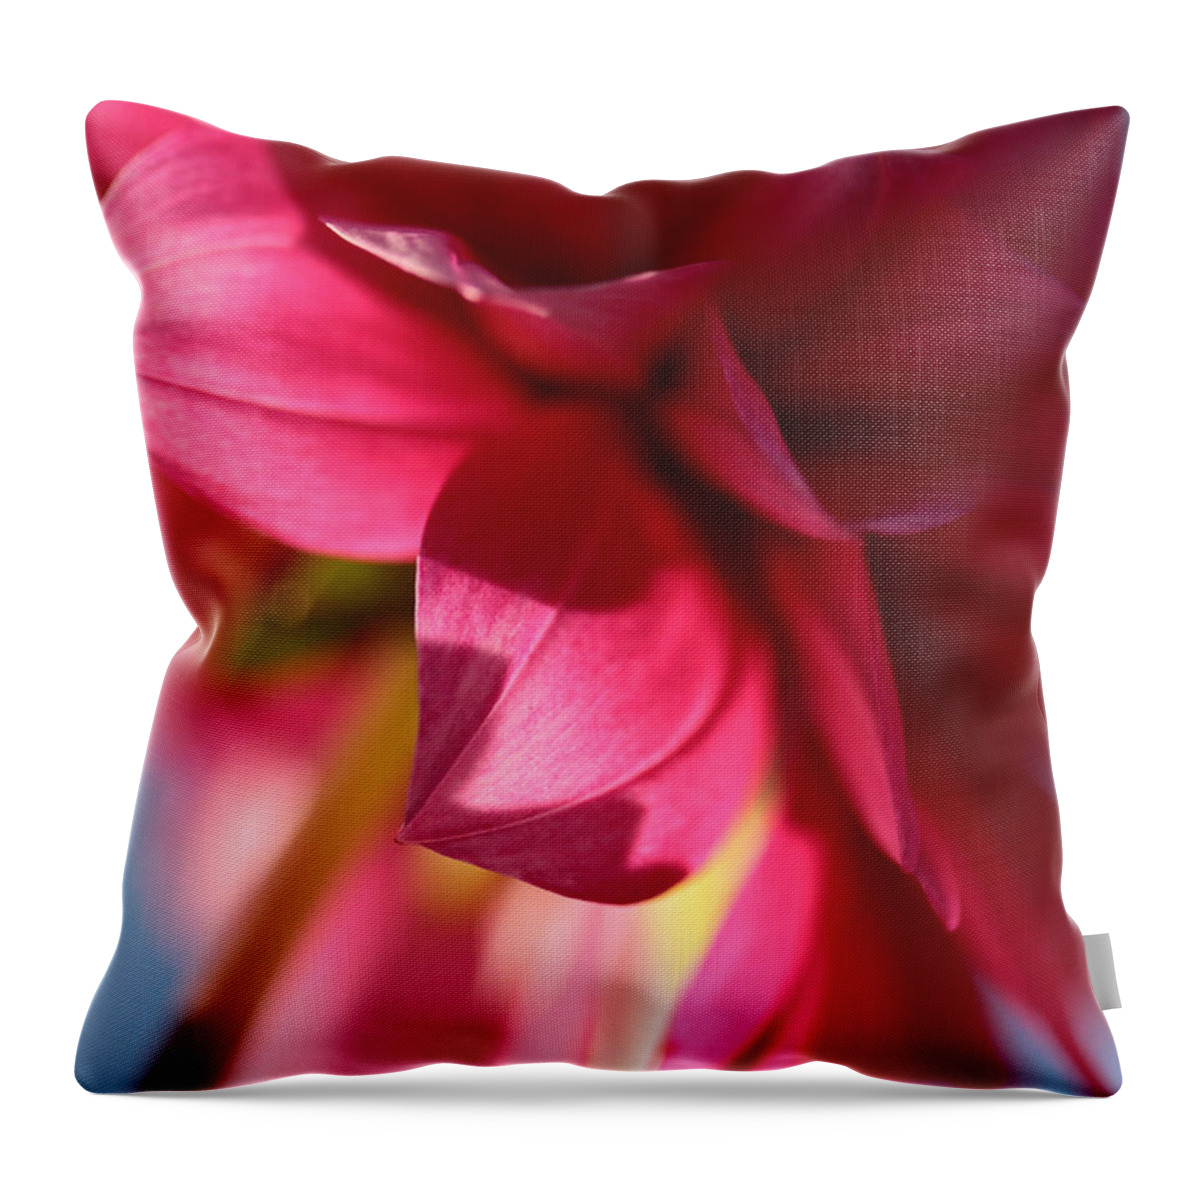 Dahlia Throw Pillow featuring the photograph The Light Touch by Connie Handscomb